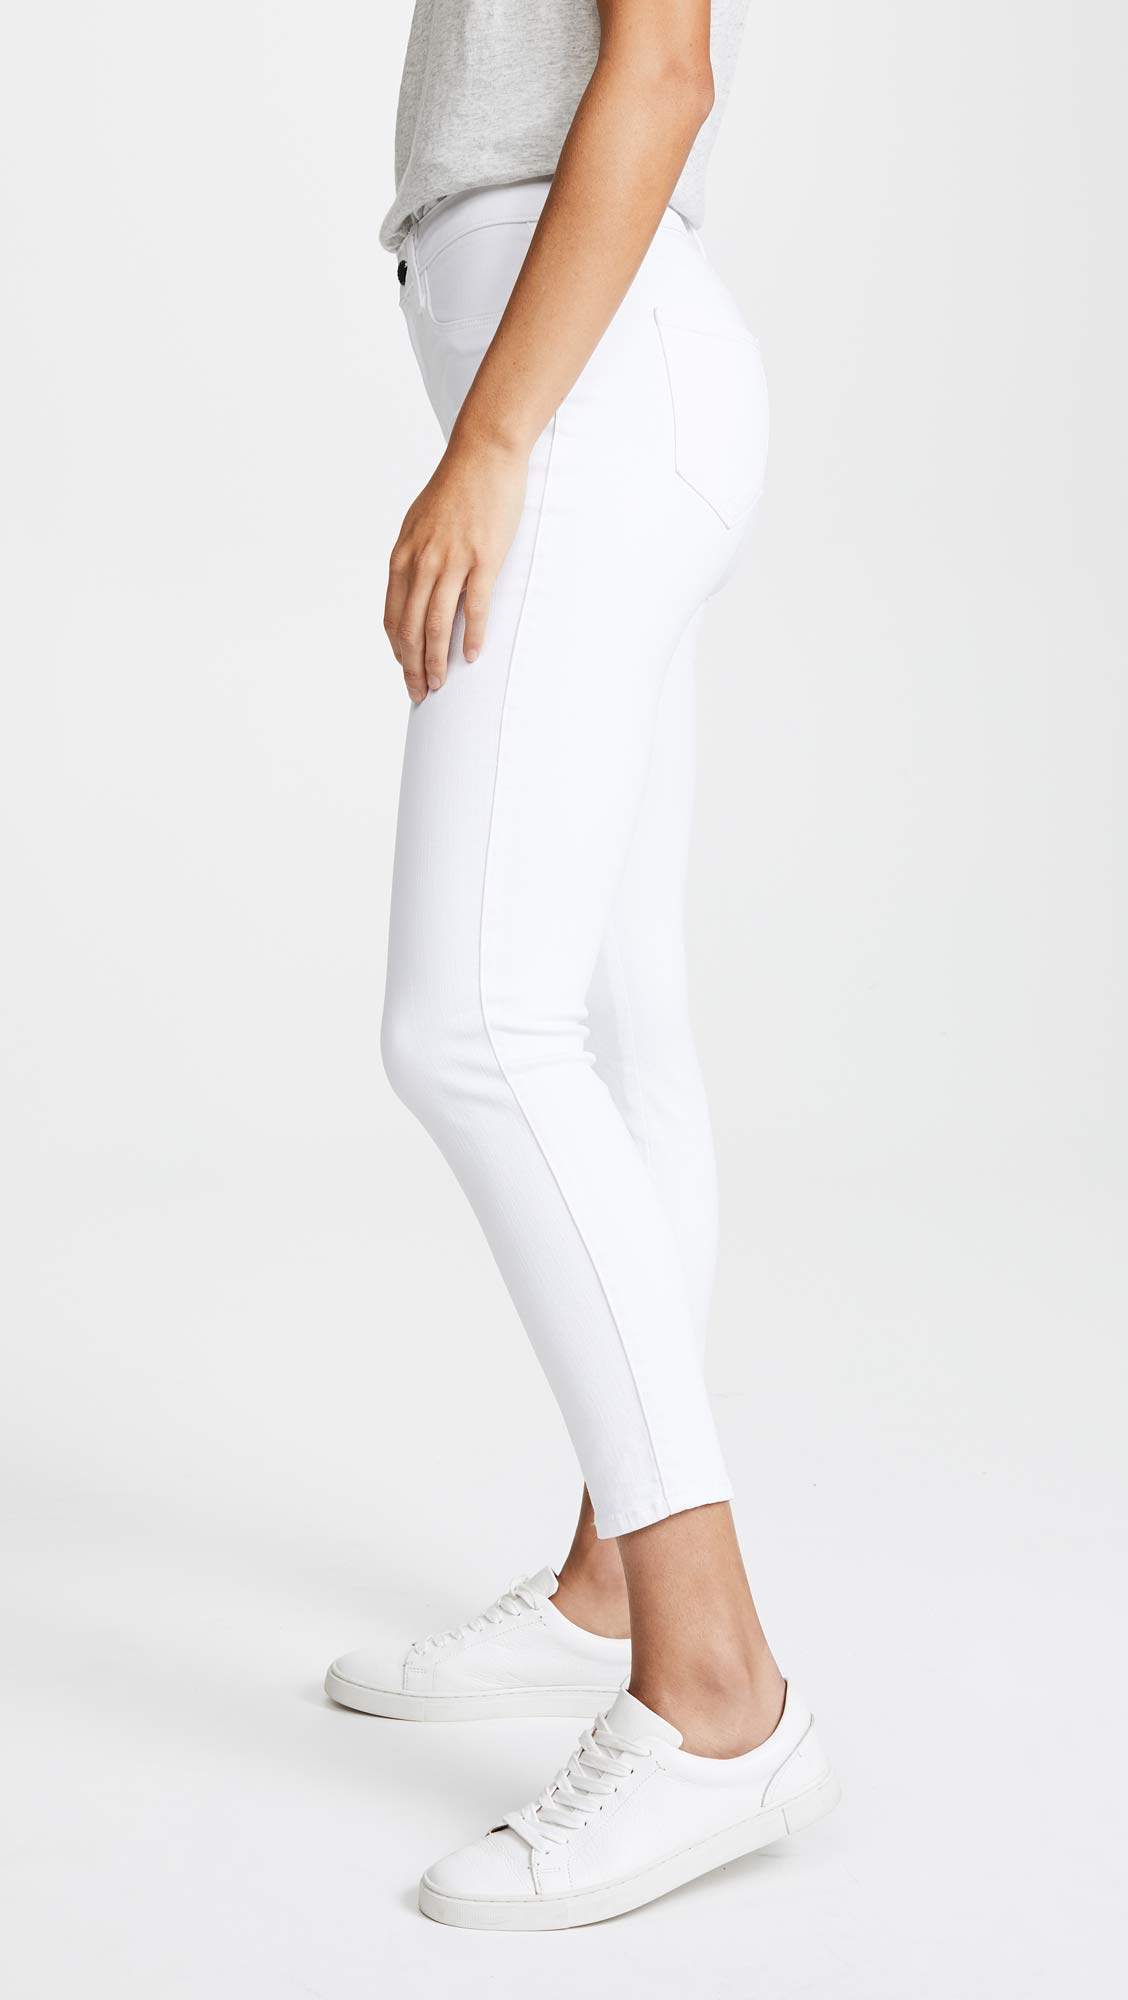 Are These The Perfect White Skinny Jeans For Summer? - THE JEANS BLOG